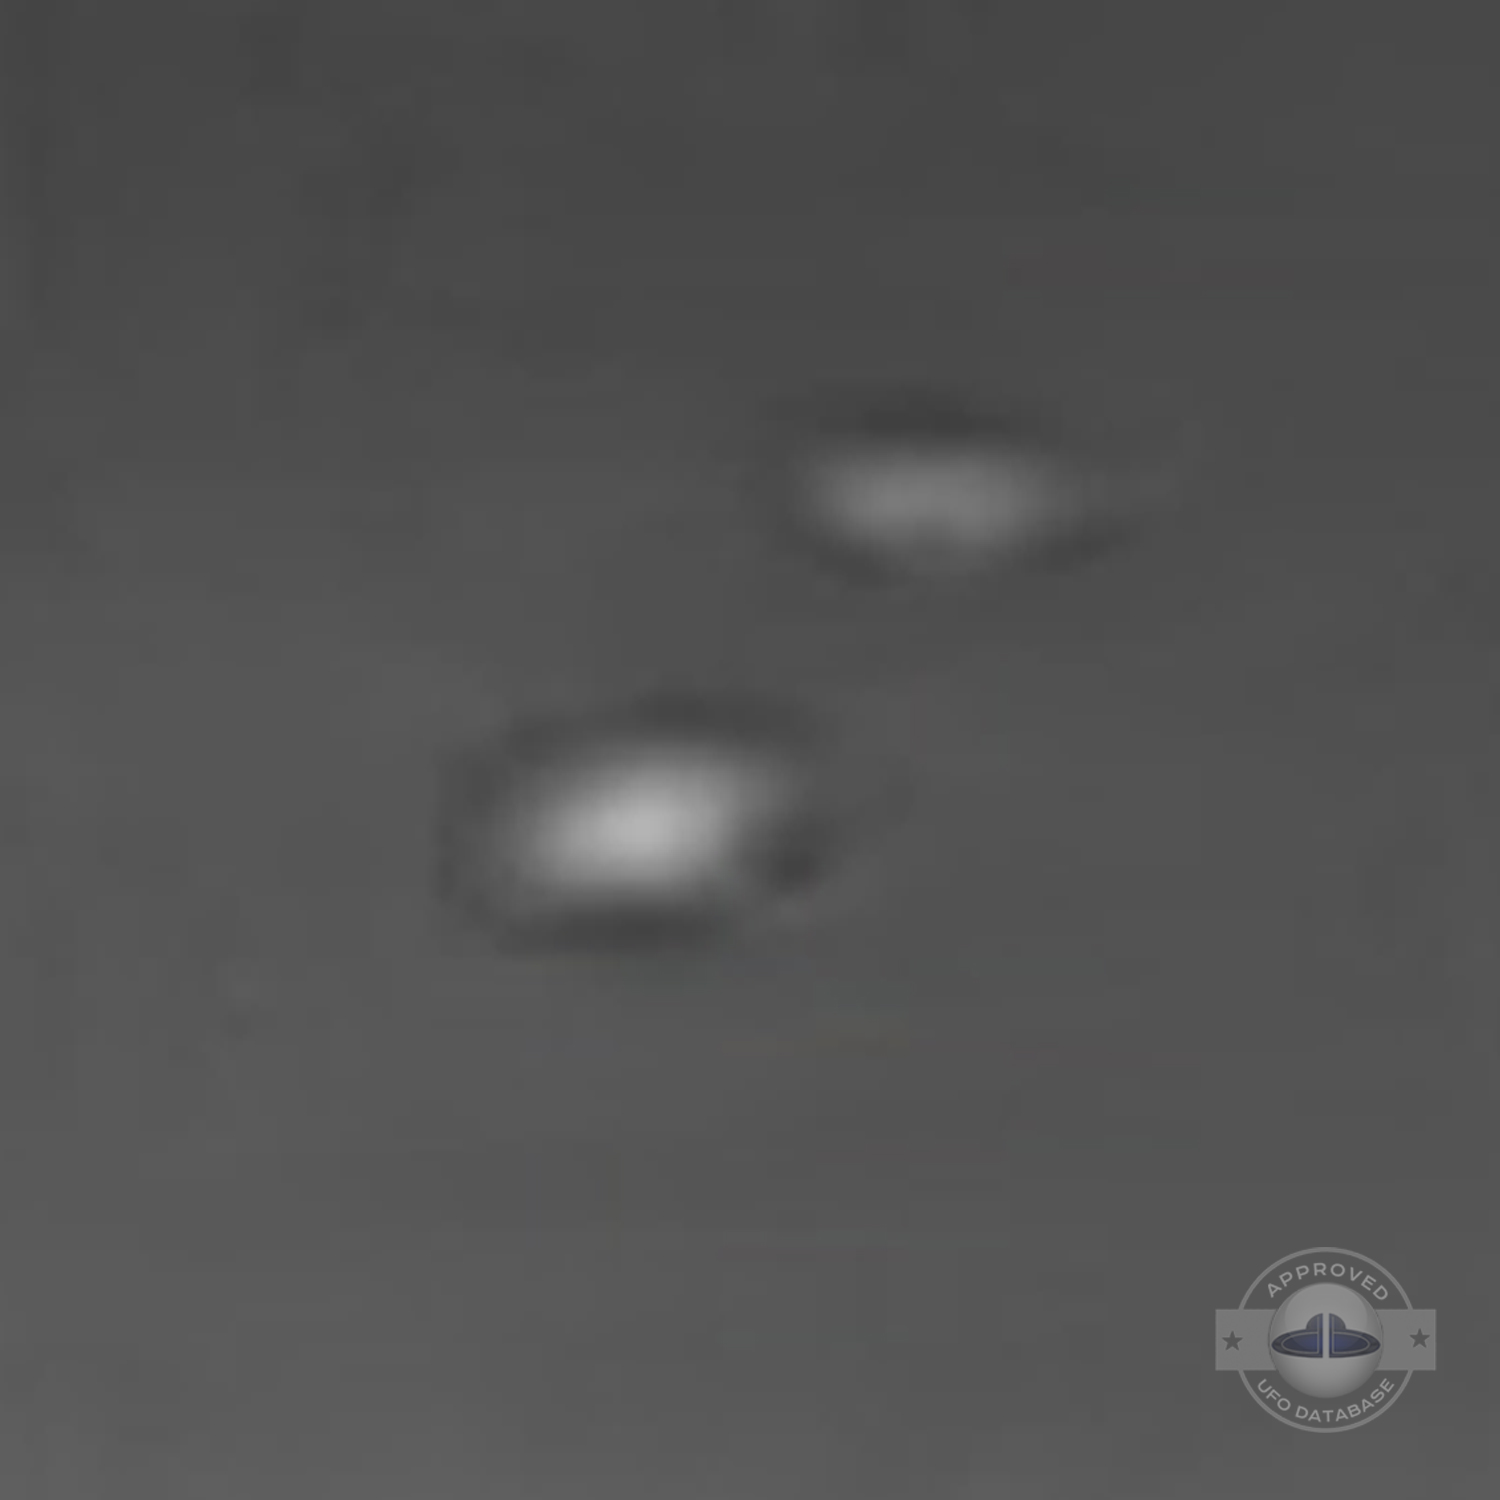 China UFO Sighting | Kunming, Yunnan UFO picture | October 14 2010 UFO Picture #151-5